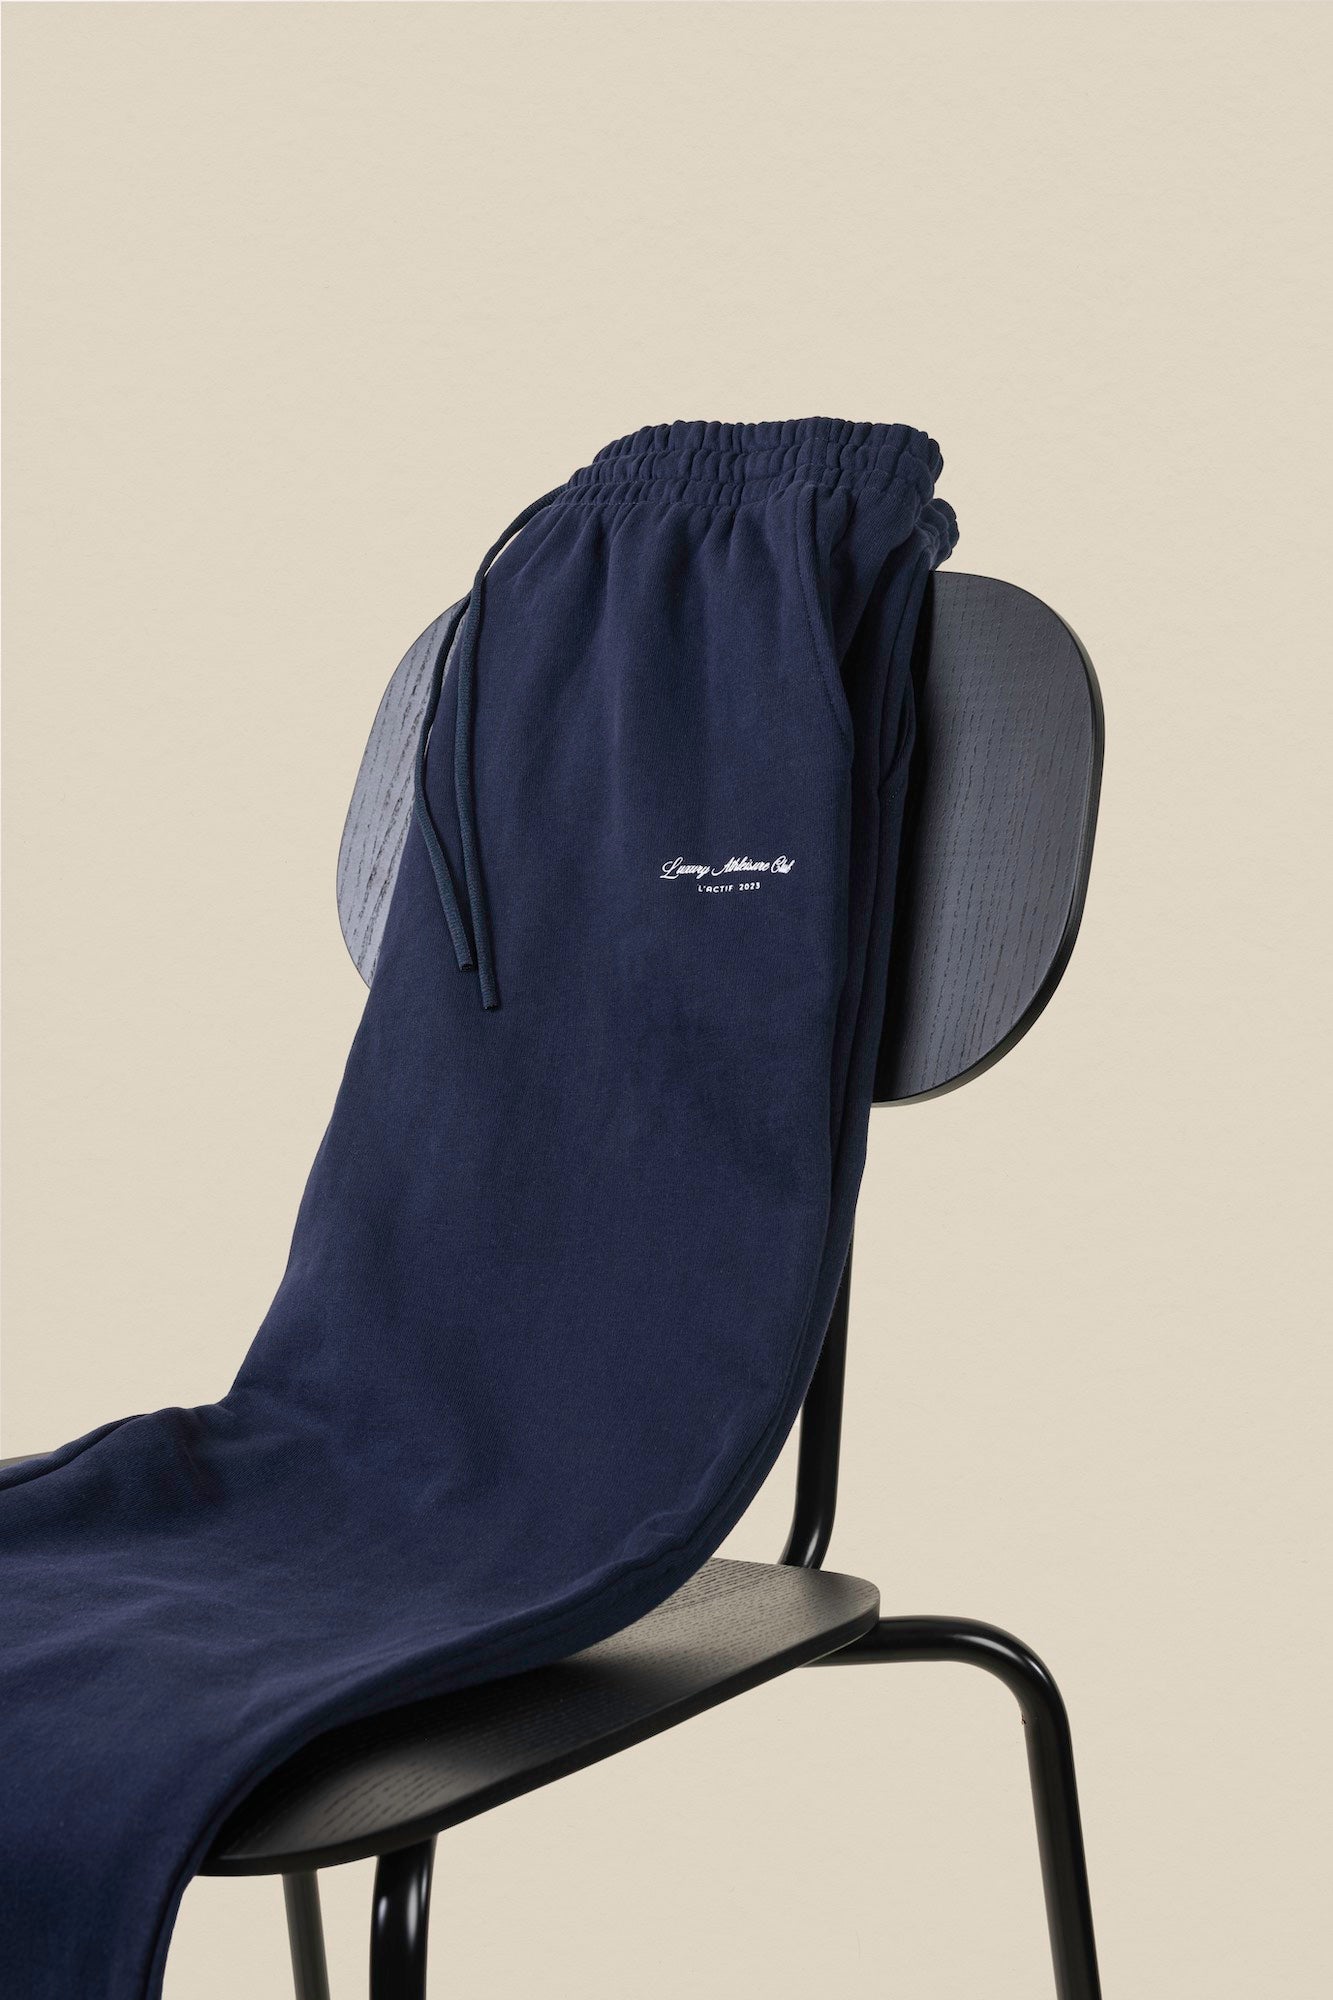 navy pants on chair